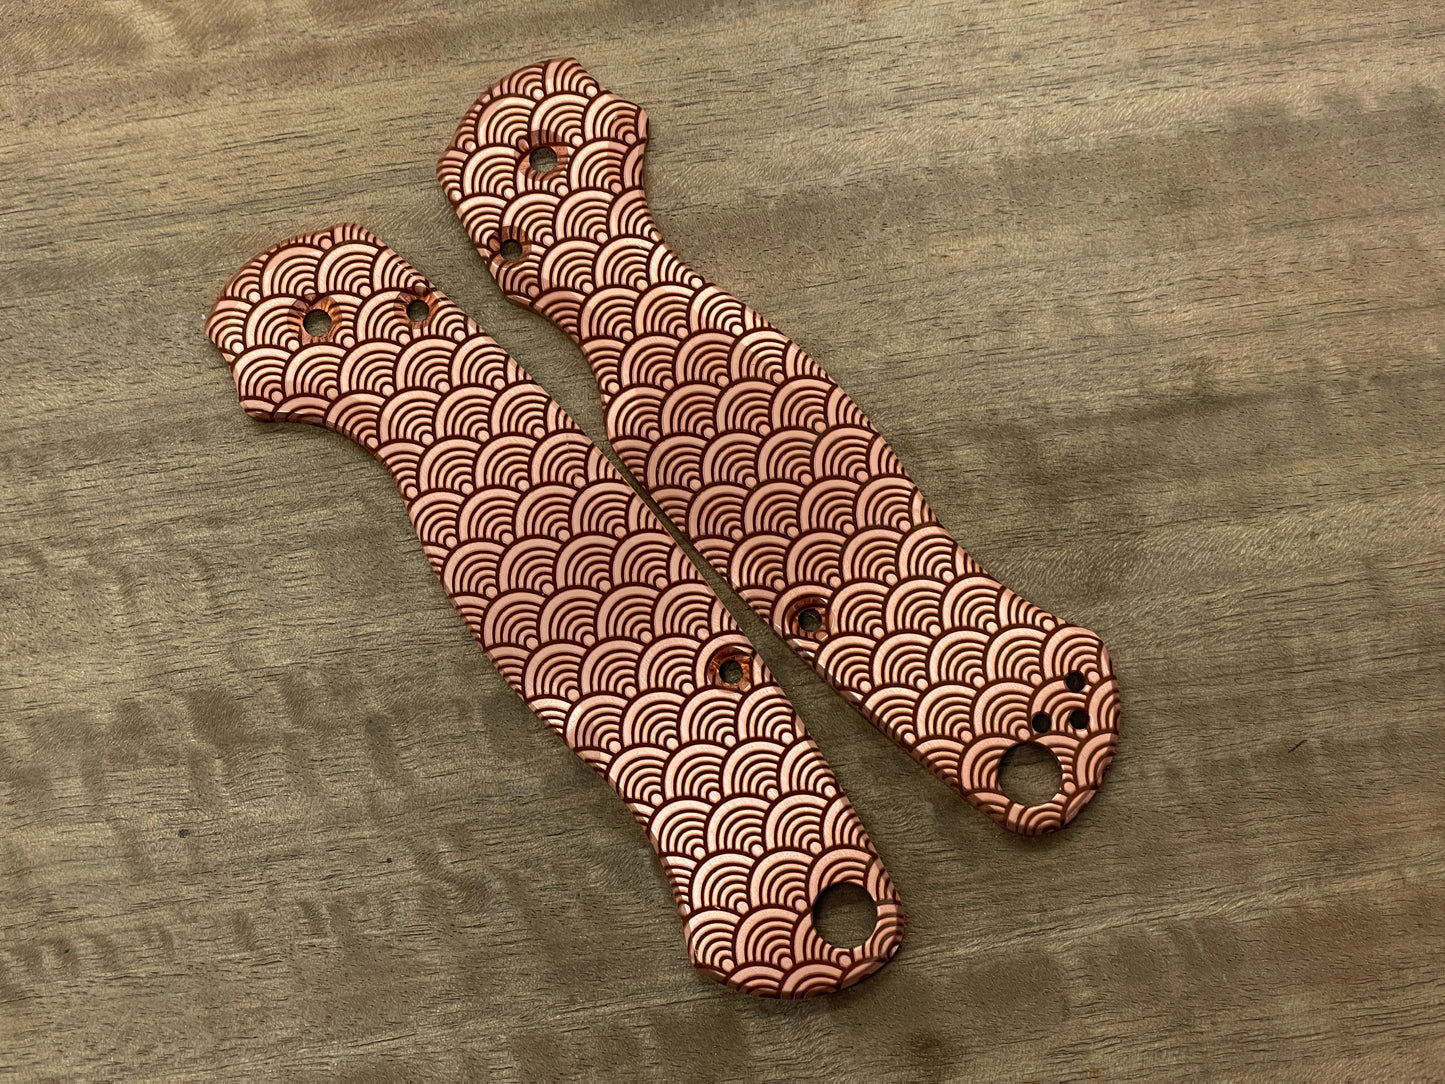 SEIGAIHA Copper scales for Spyderco Paramilitary 2 PM2